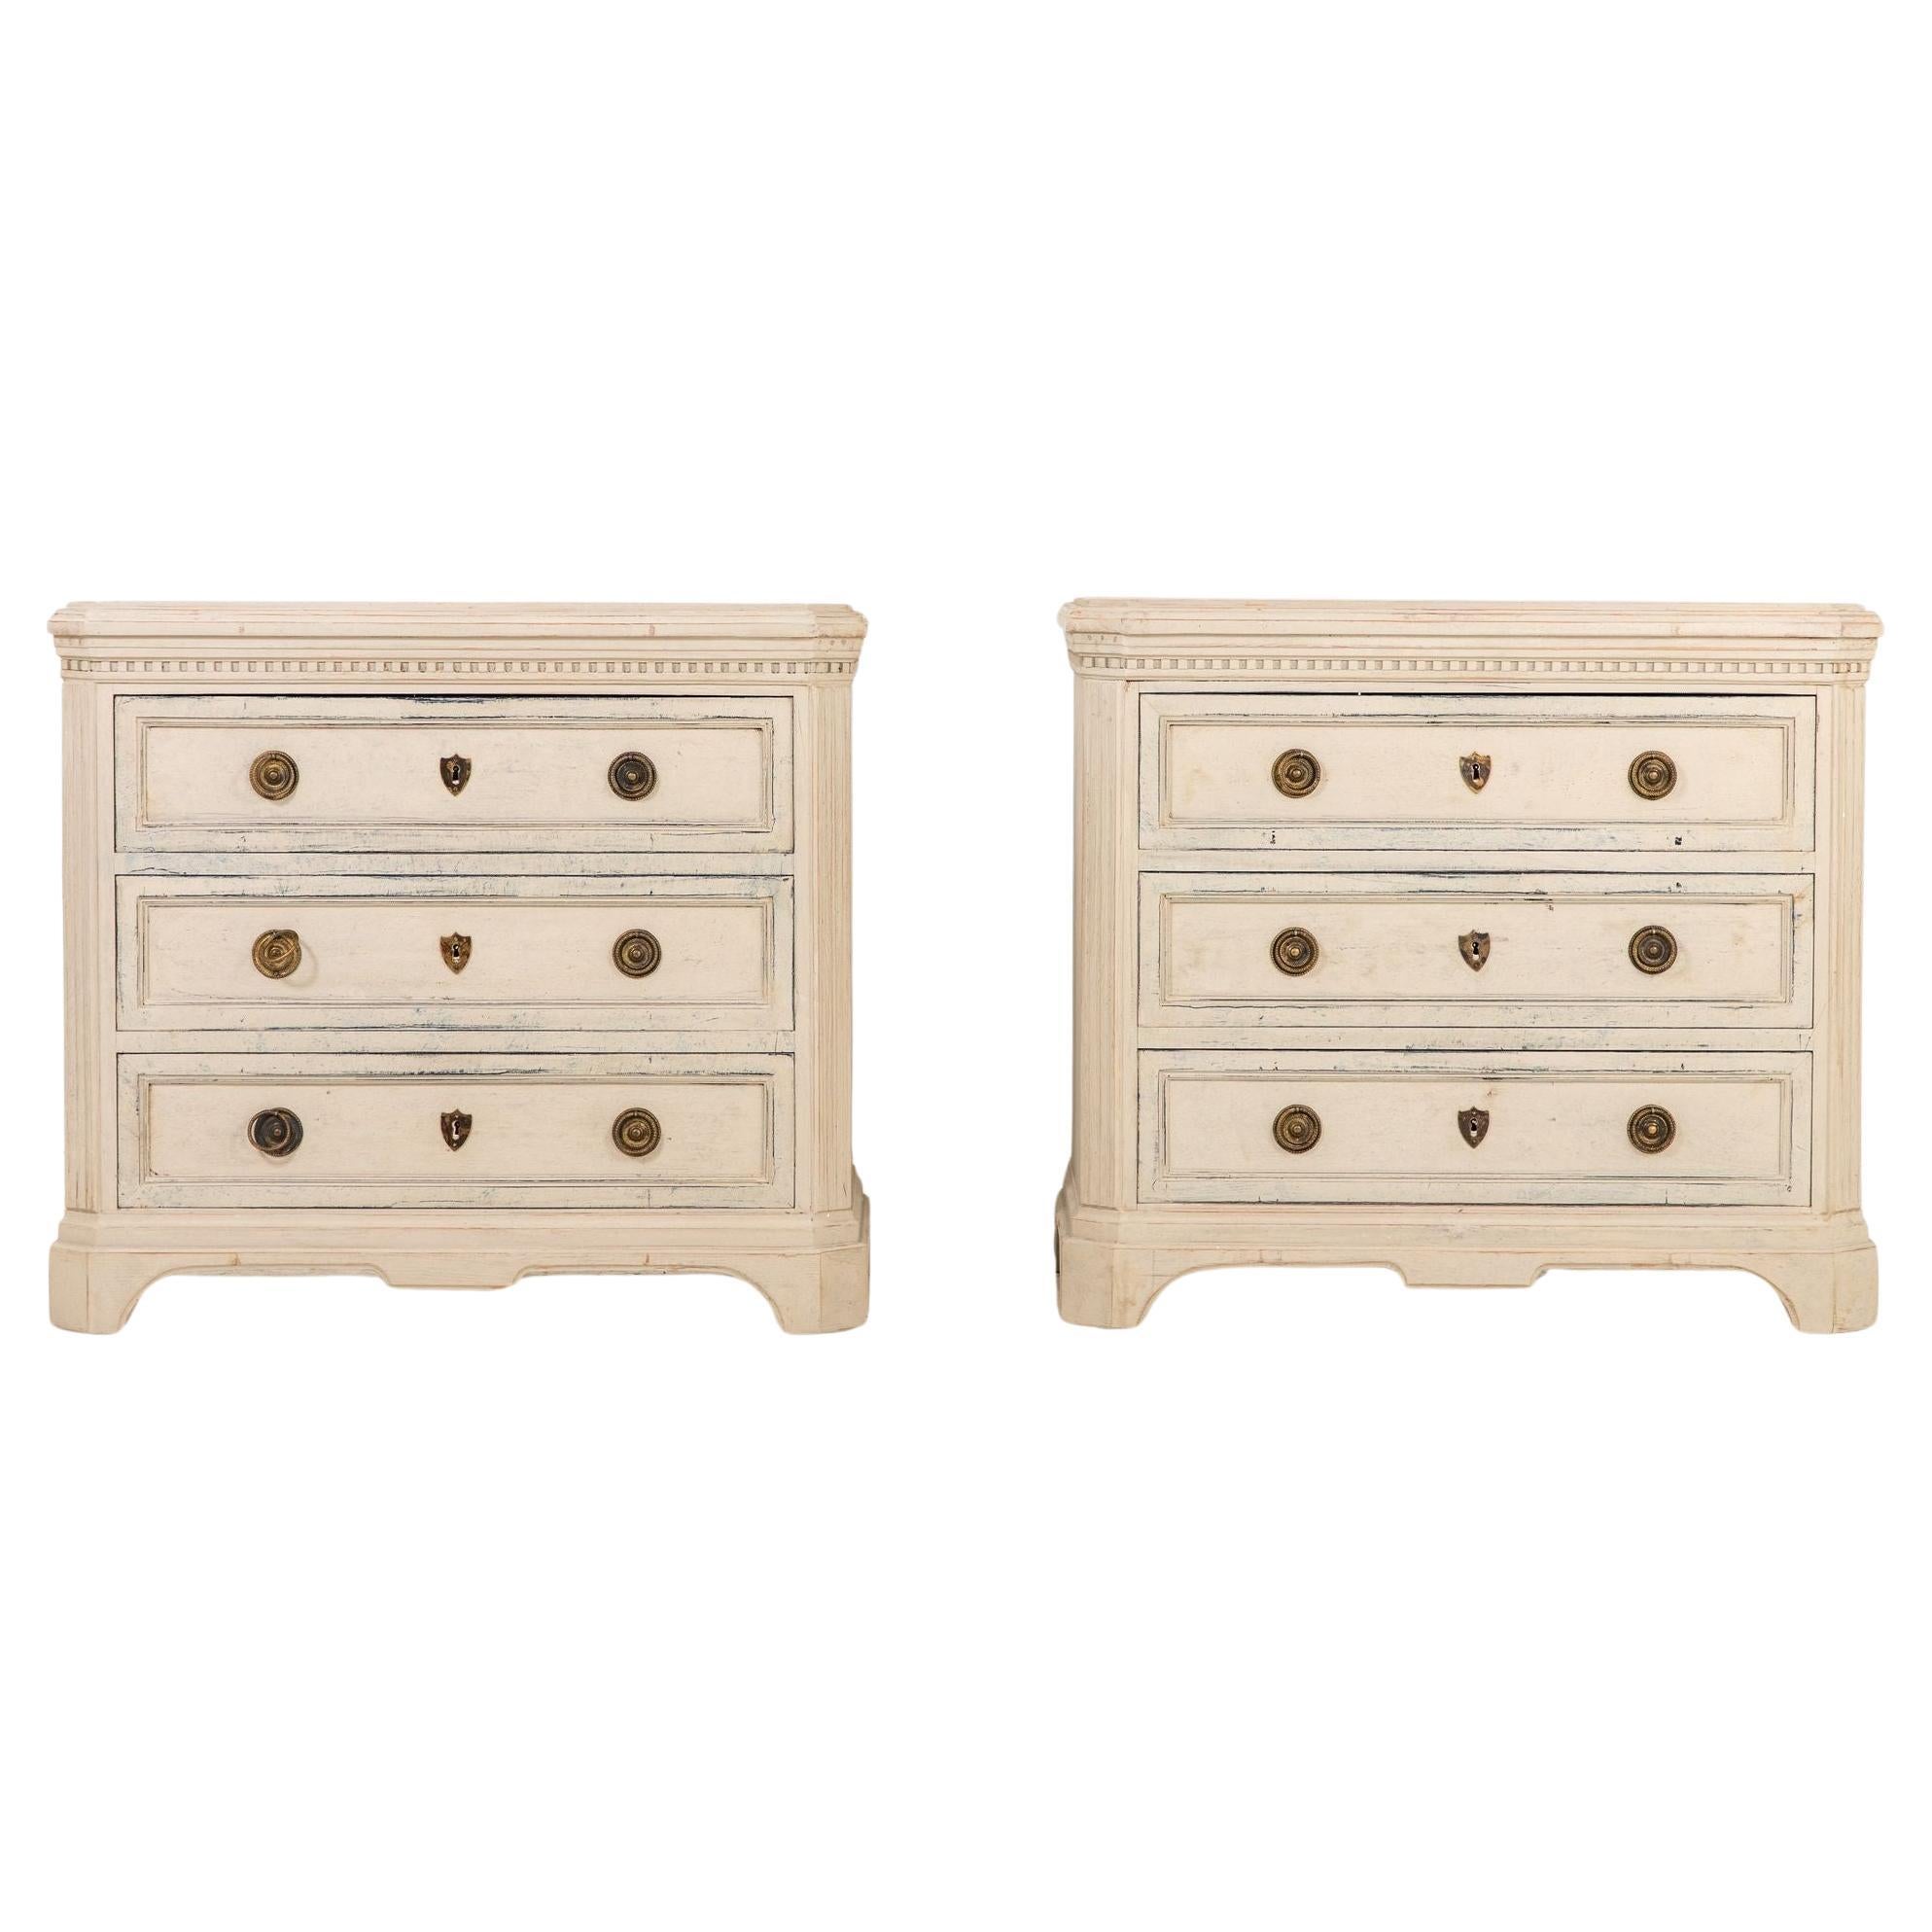 Pair of Gustavian Style Chests of Drawers, Early 20th C.